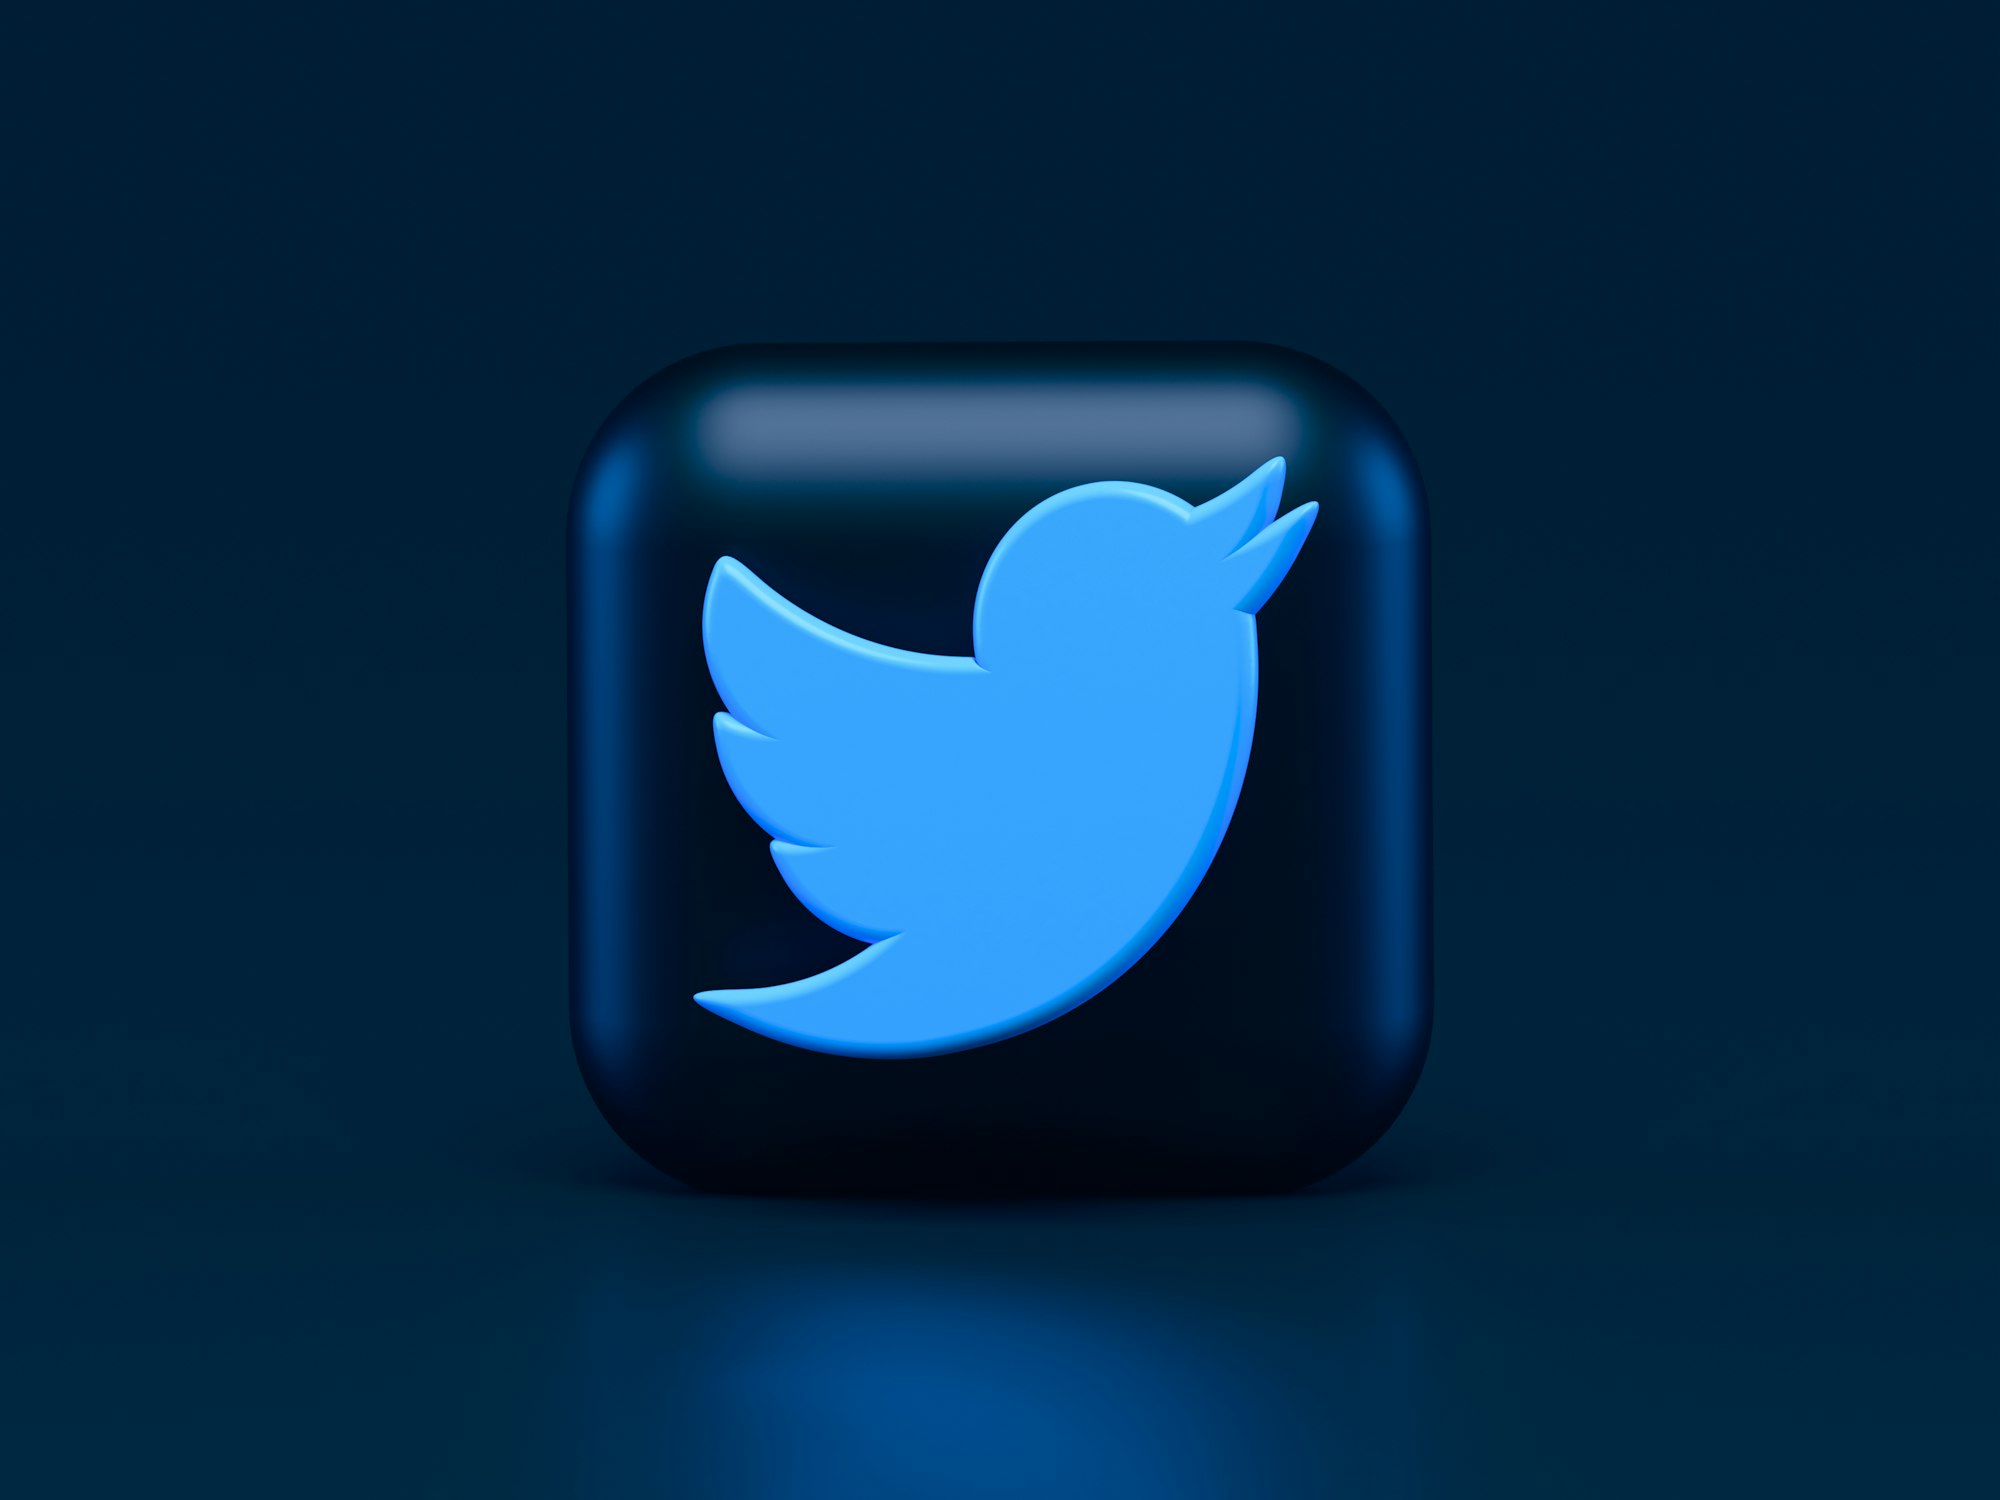 Twitter enables publishers to charge users on a per-article basis